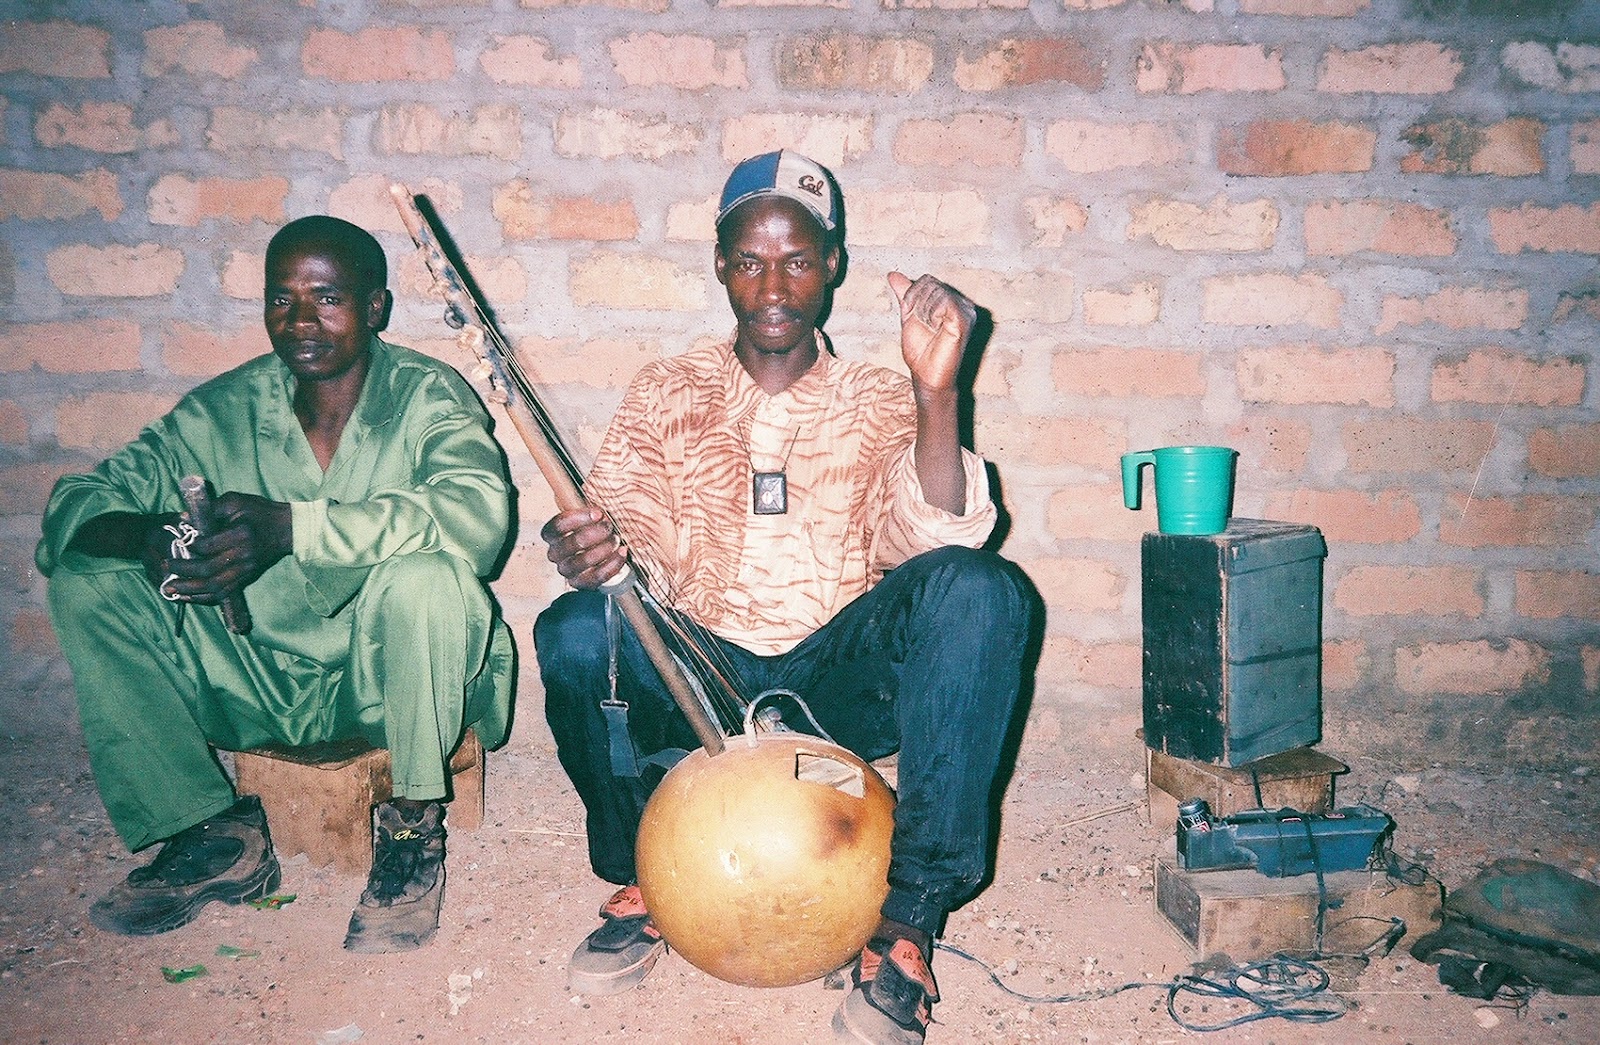 Wassoulou musicians in West Africa